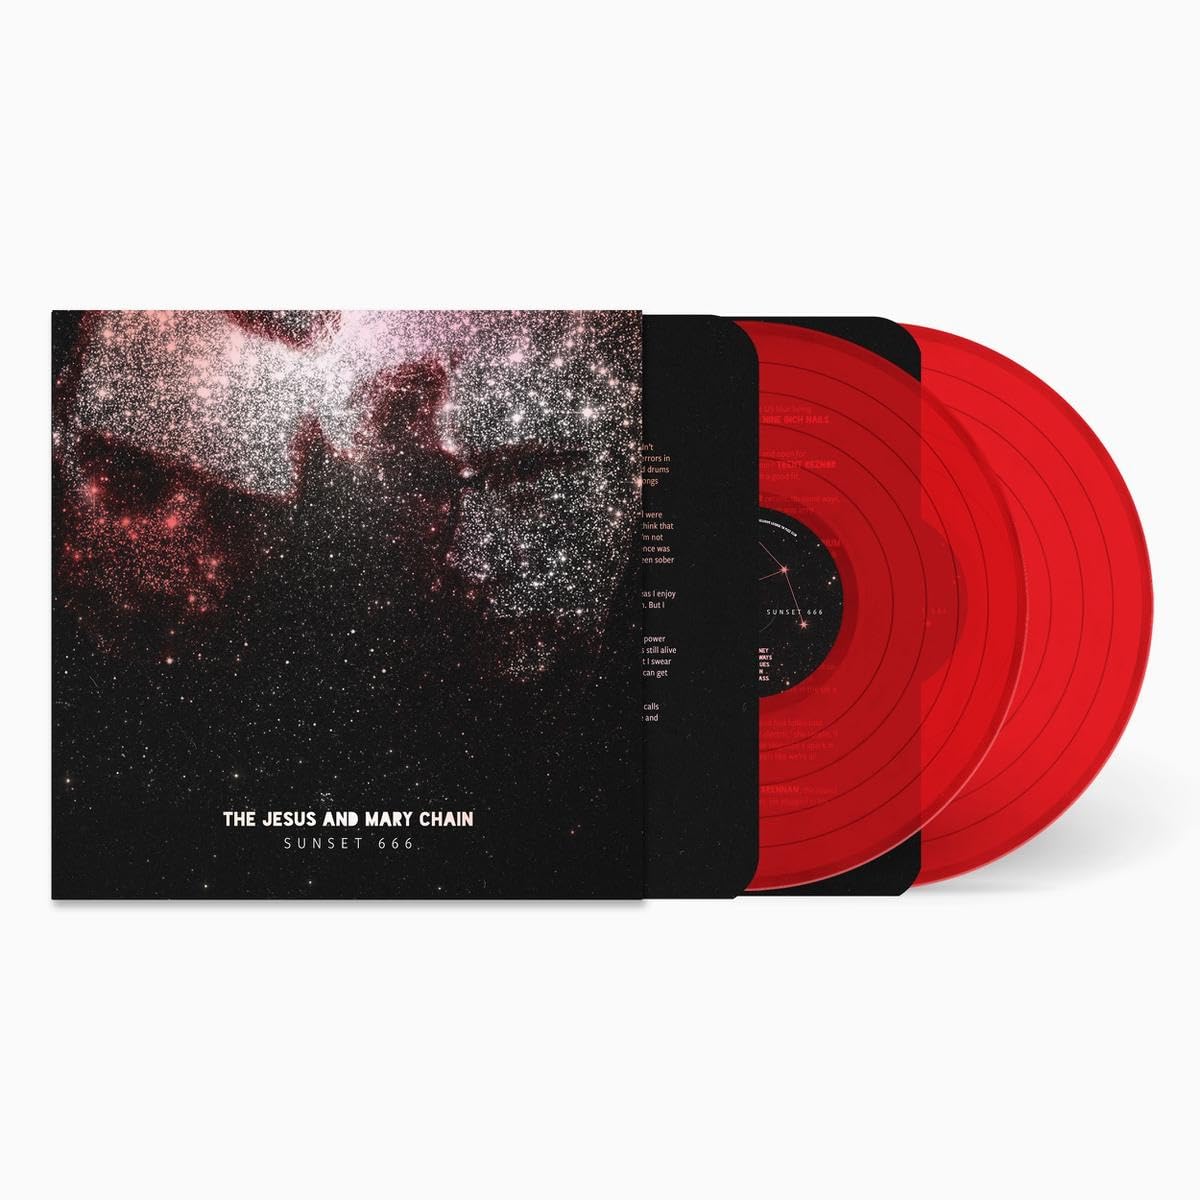 The Jesus And Mary Chain - Sunset 666 - VINYL 2LP colored vinyl red